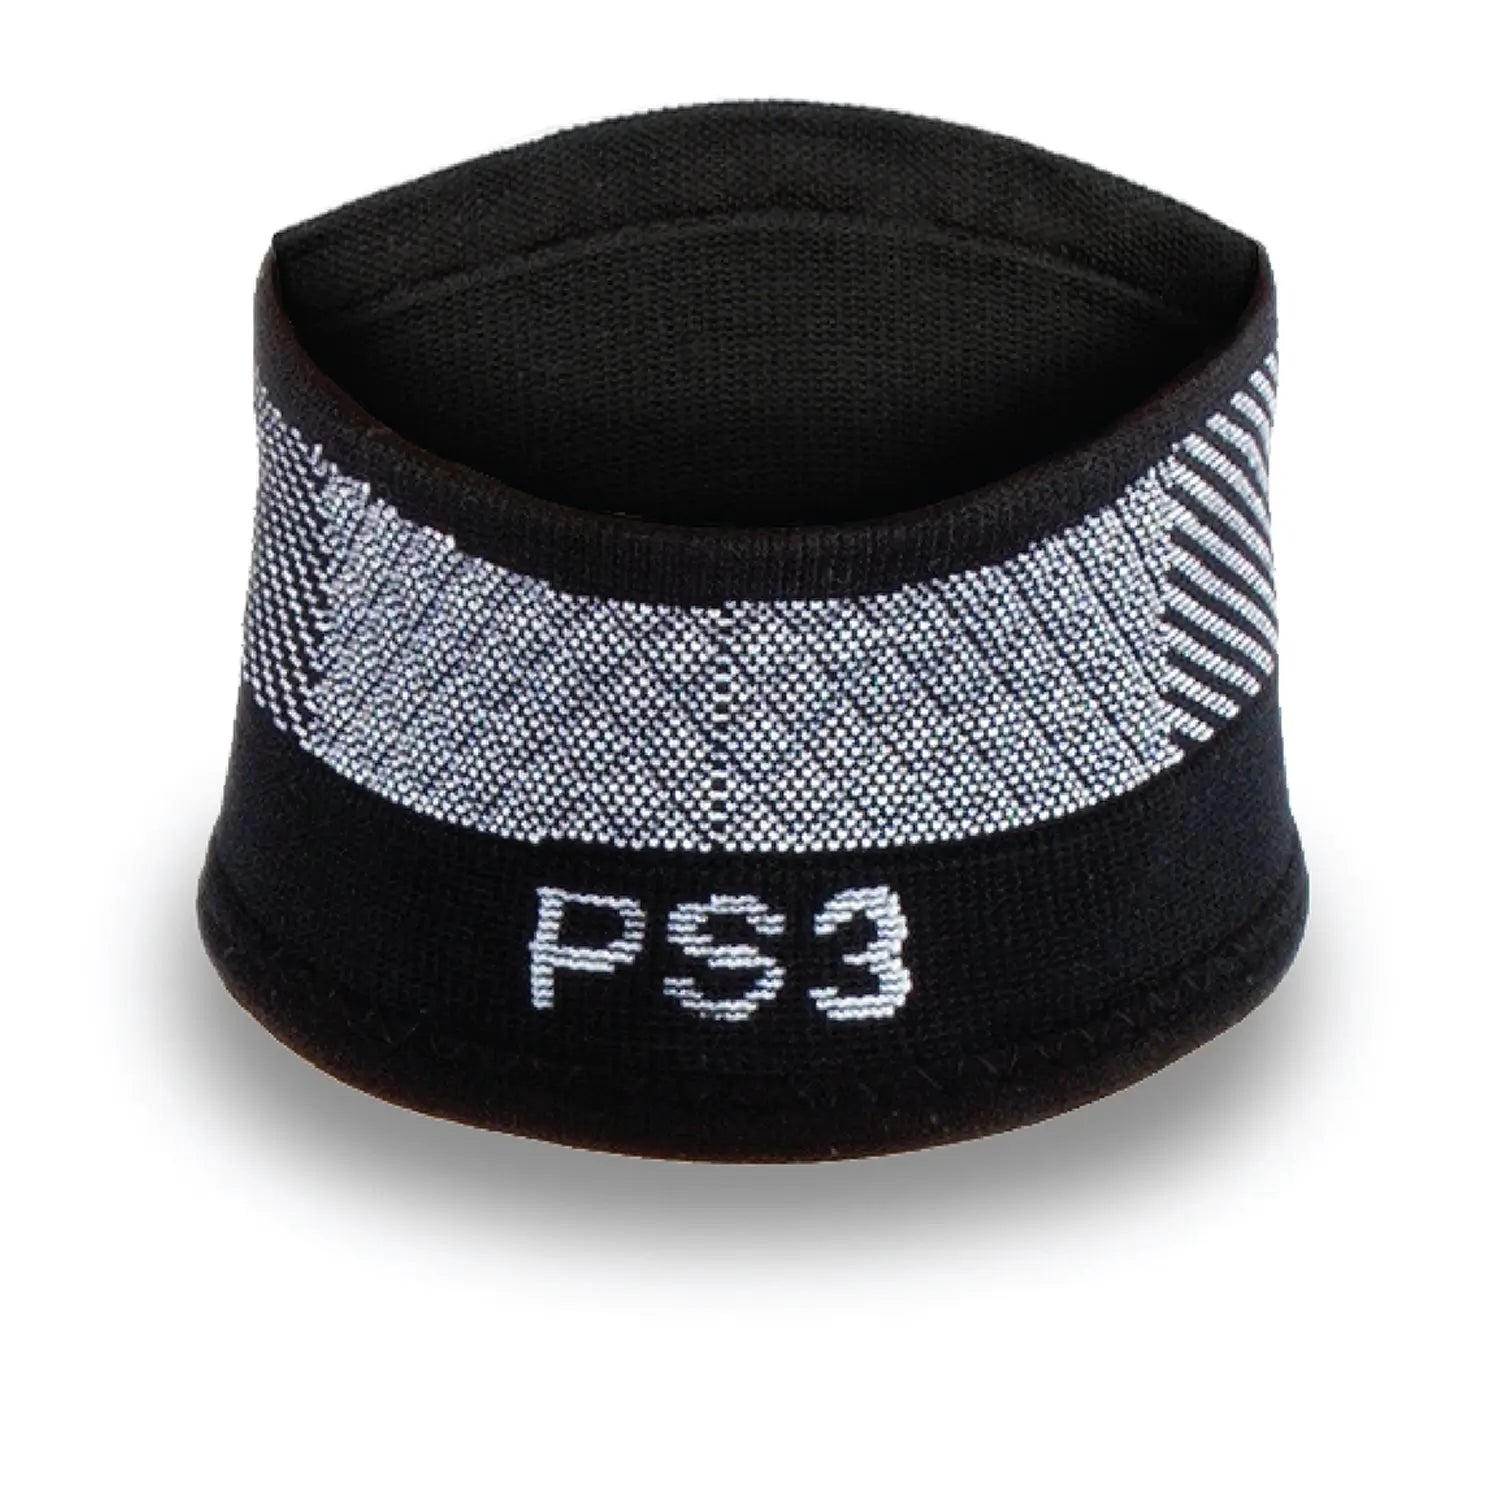 PS3 Performance Patella Sleeve For Pain Relief